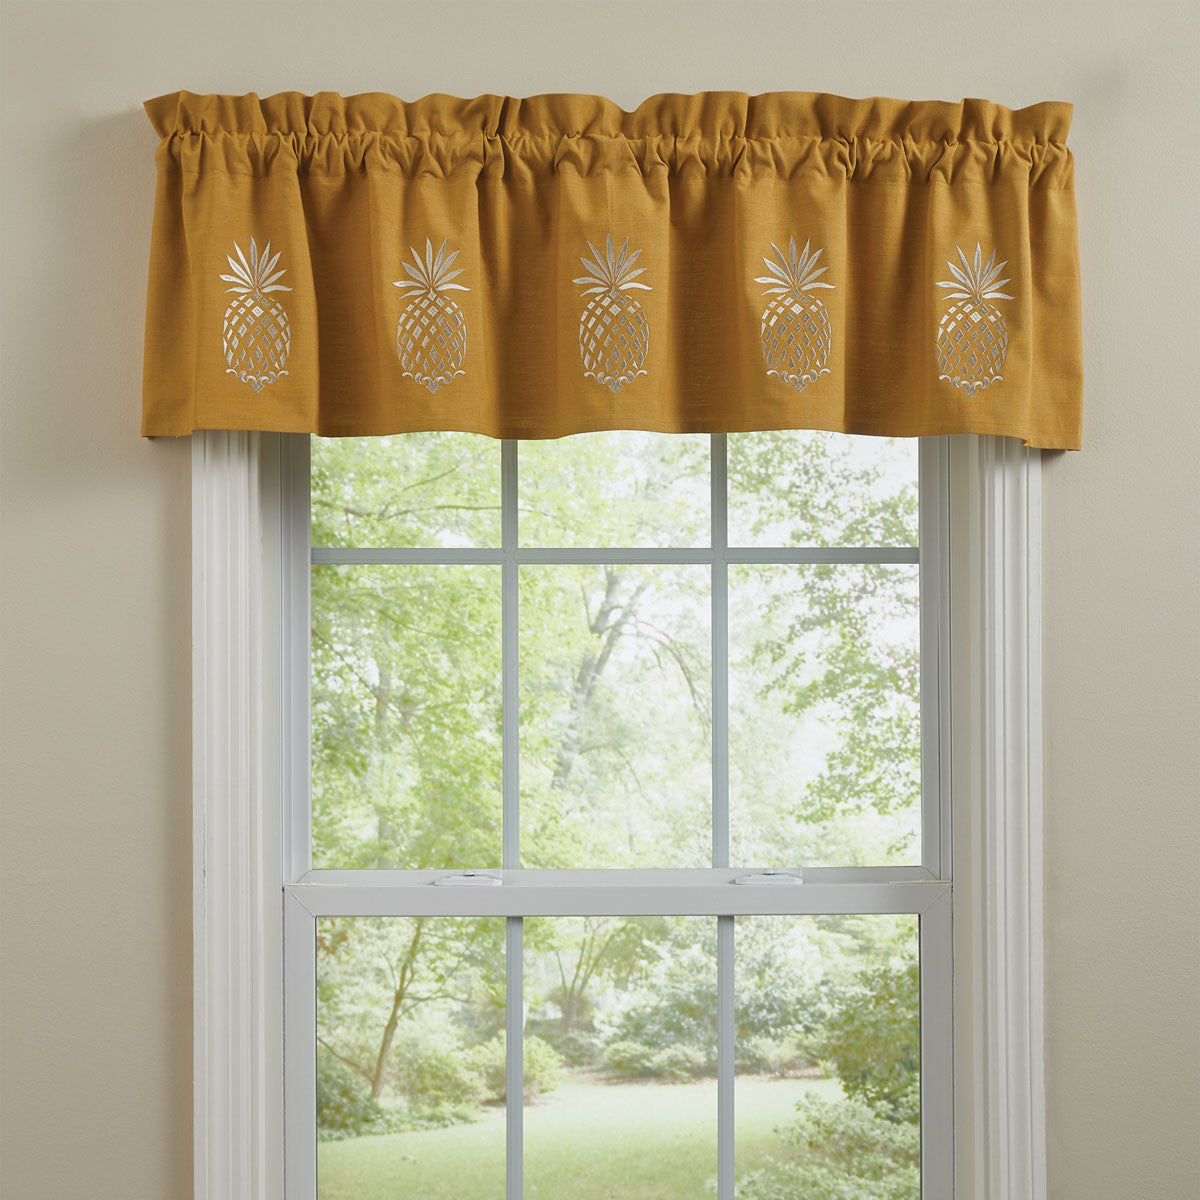 Pineapple Embroidered Valance - Lined 60x14 Park Designs